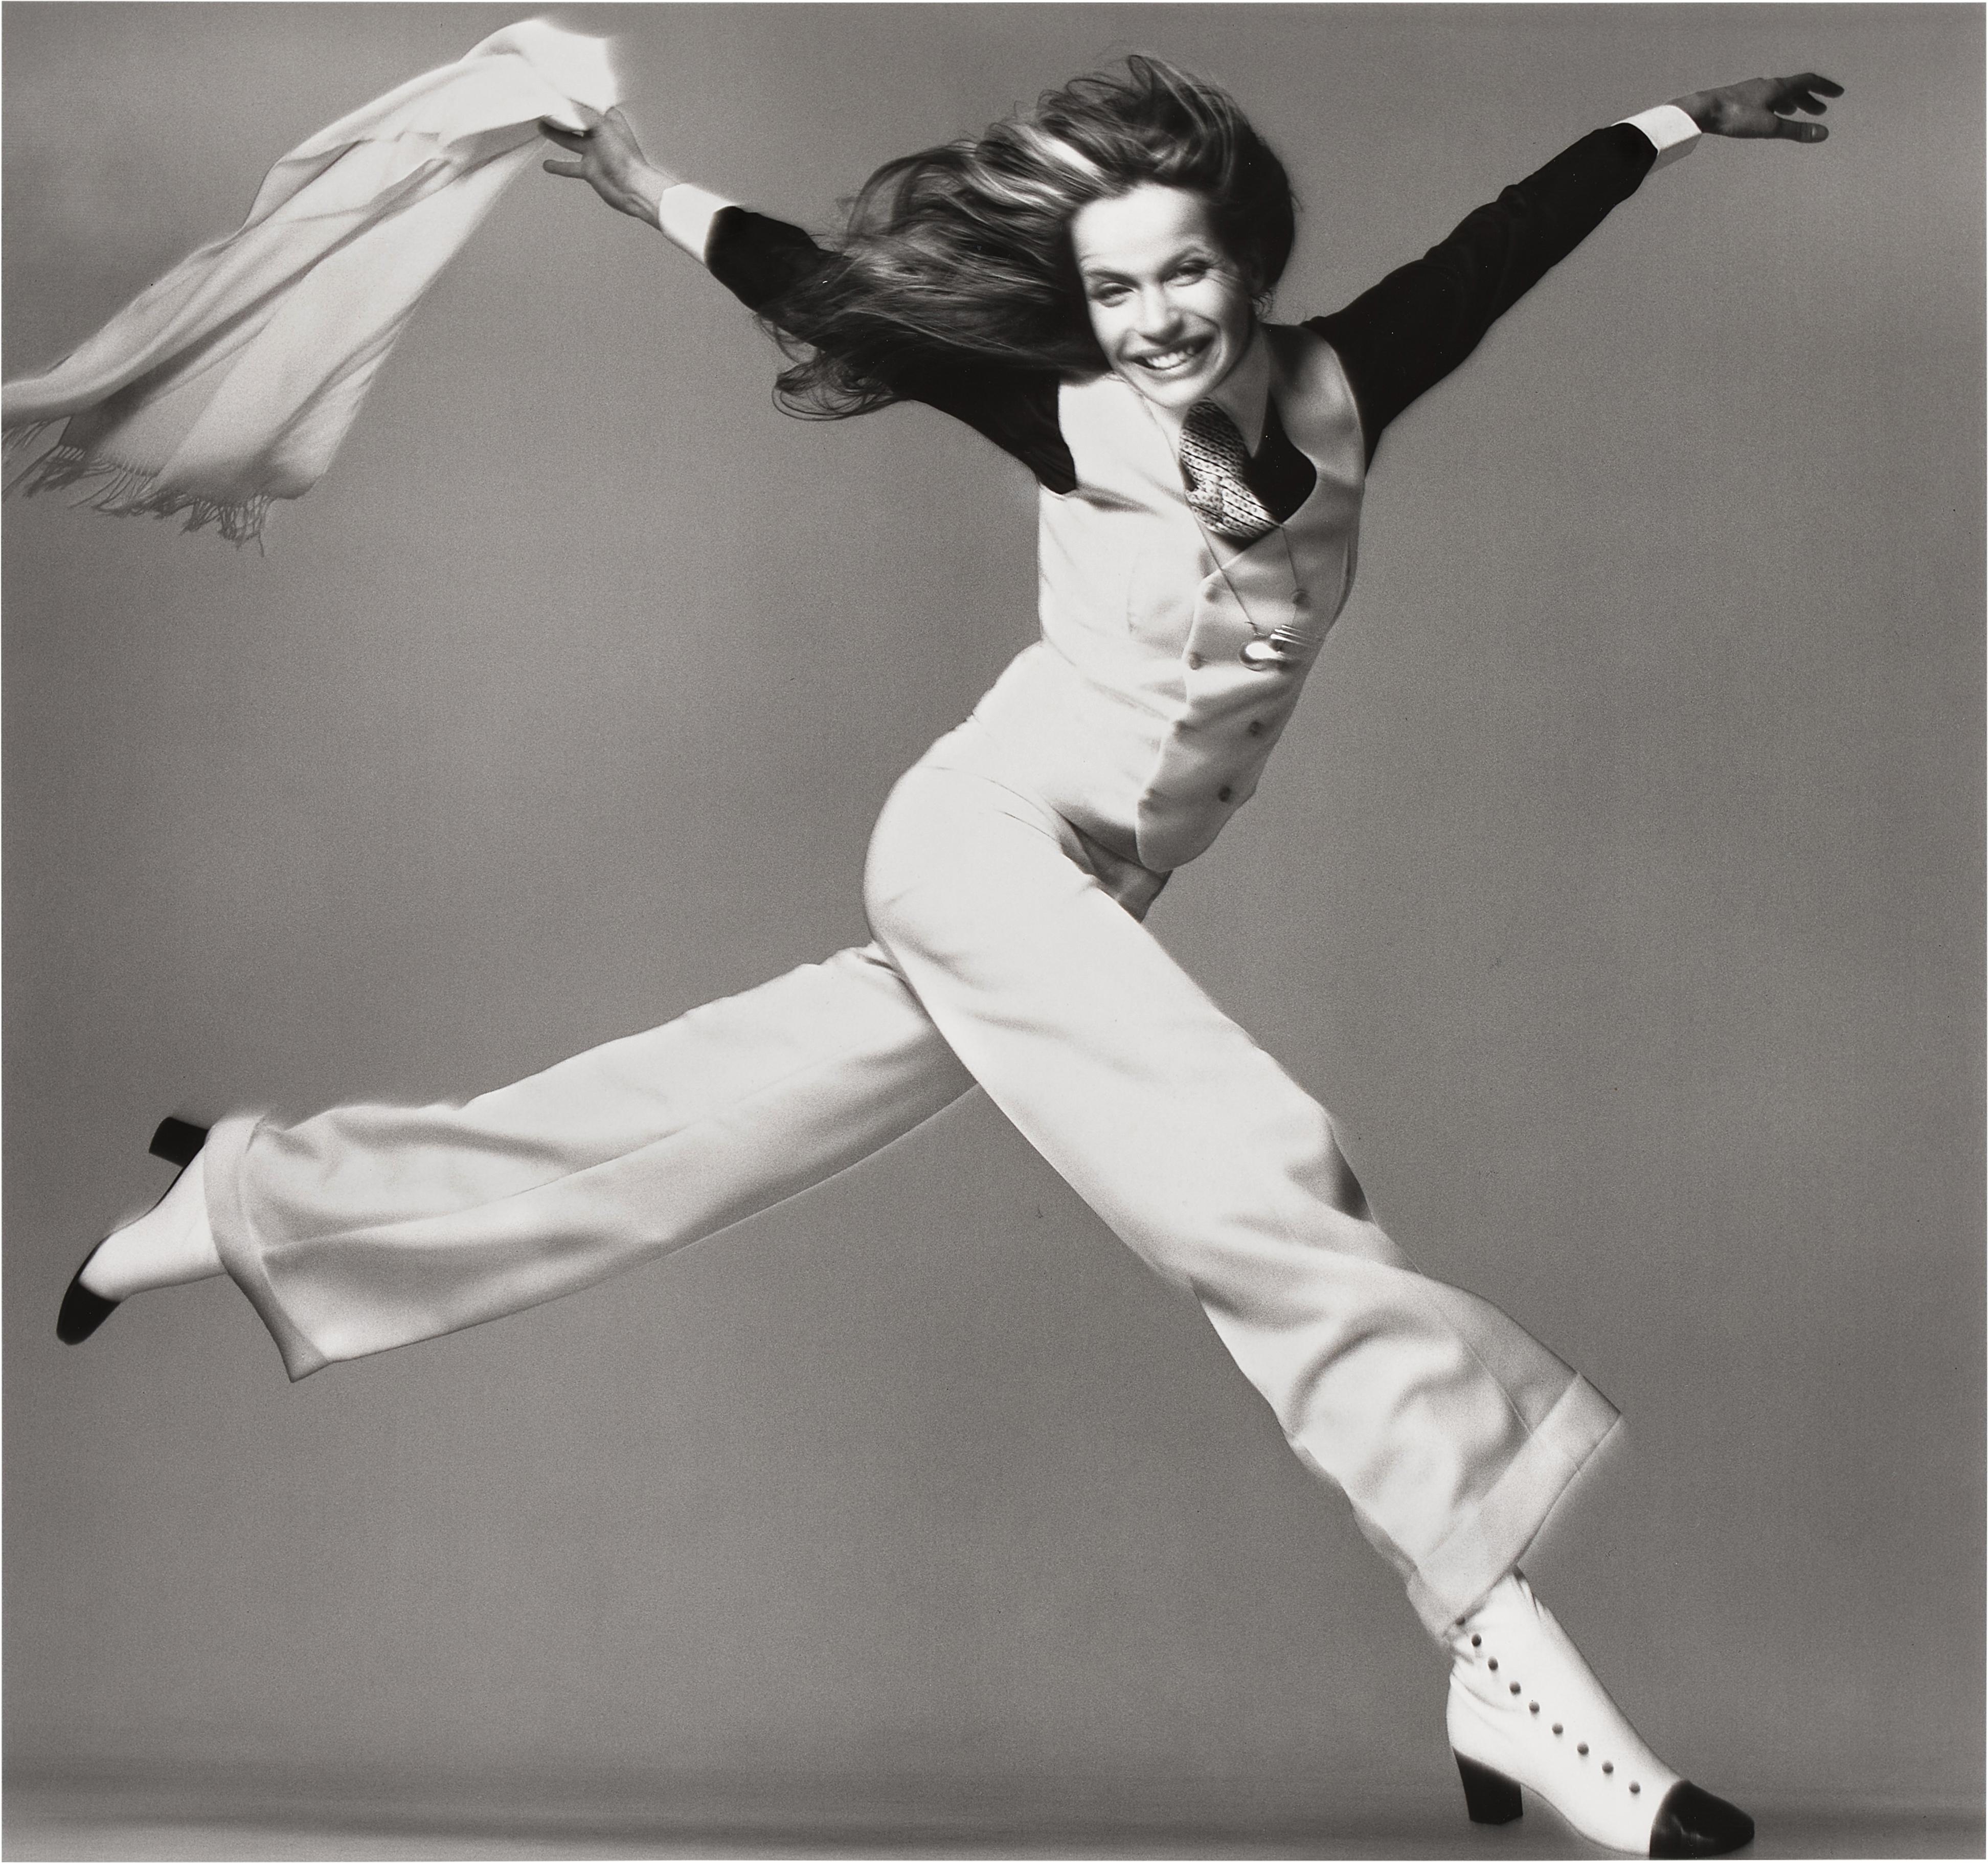 Veruschka, Suit by Anthony Arland, New York Studio by Richard Avedon, printed in 1981